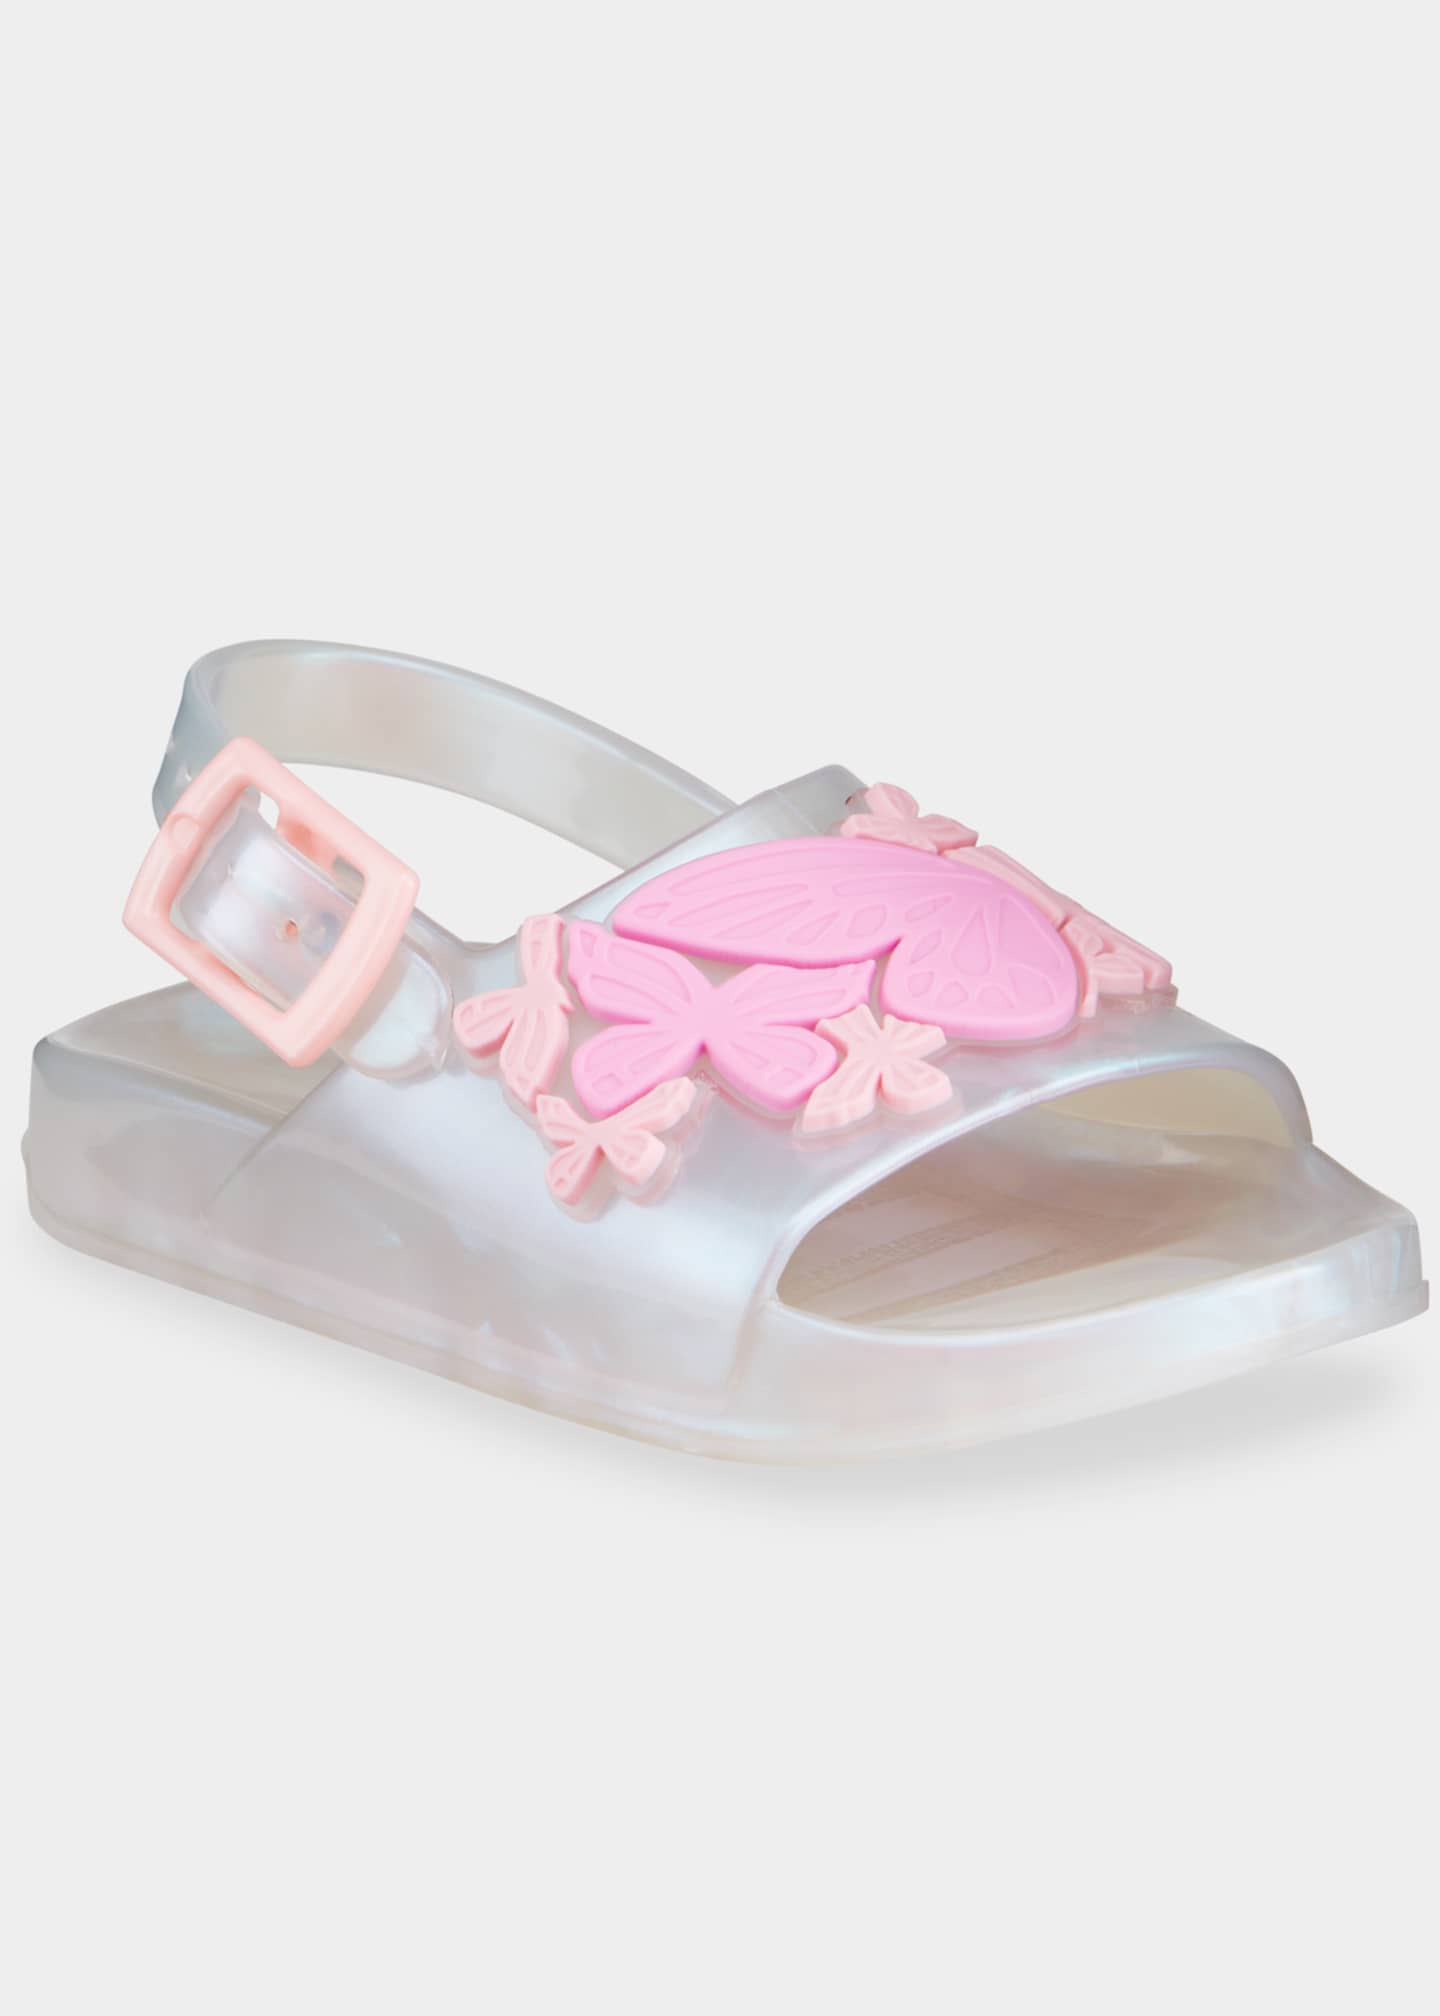 Sophia Webster Girl's Butterfly Jelly Slides, Baby/Toddlers - Bergdorf ...